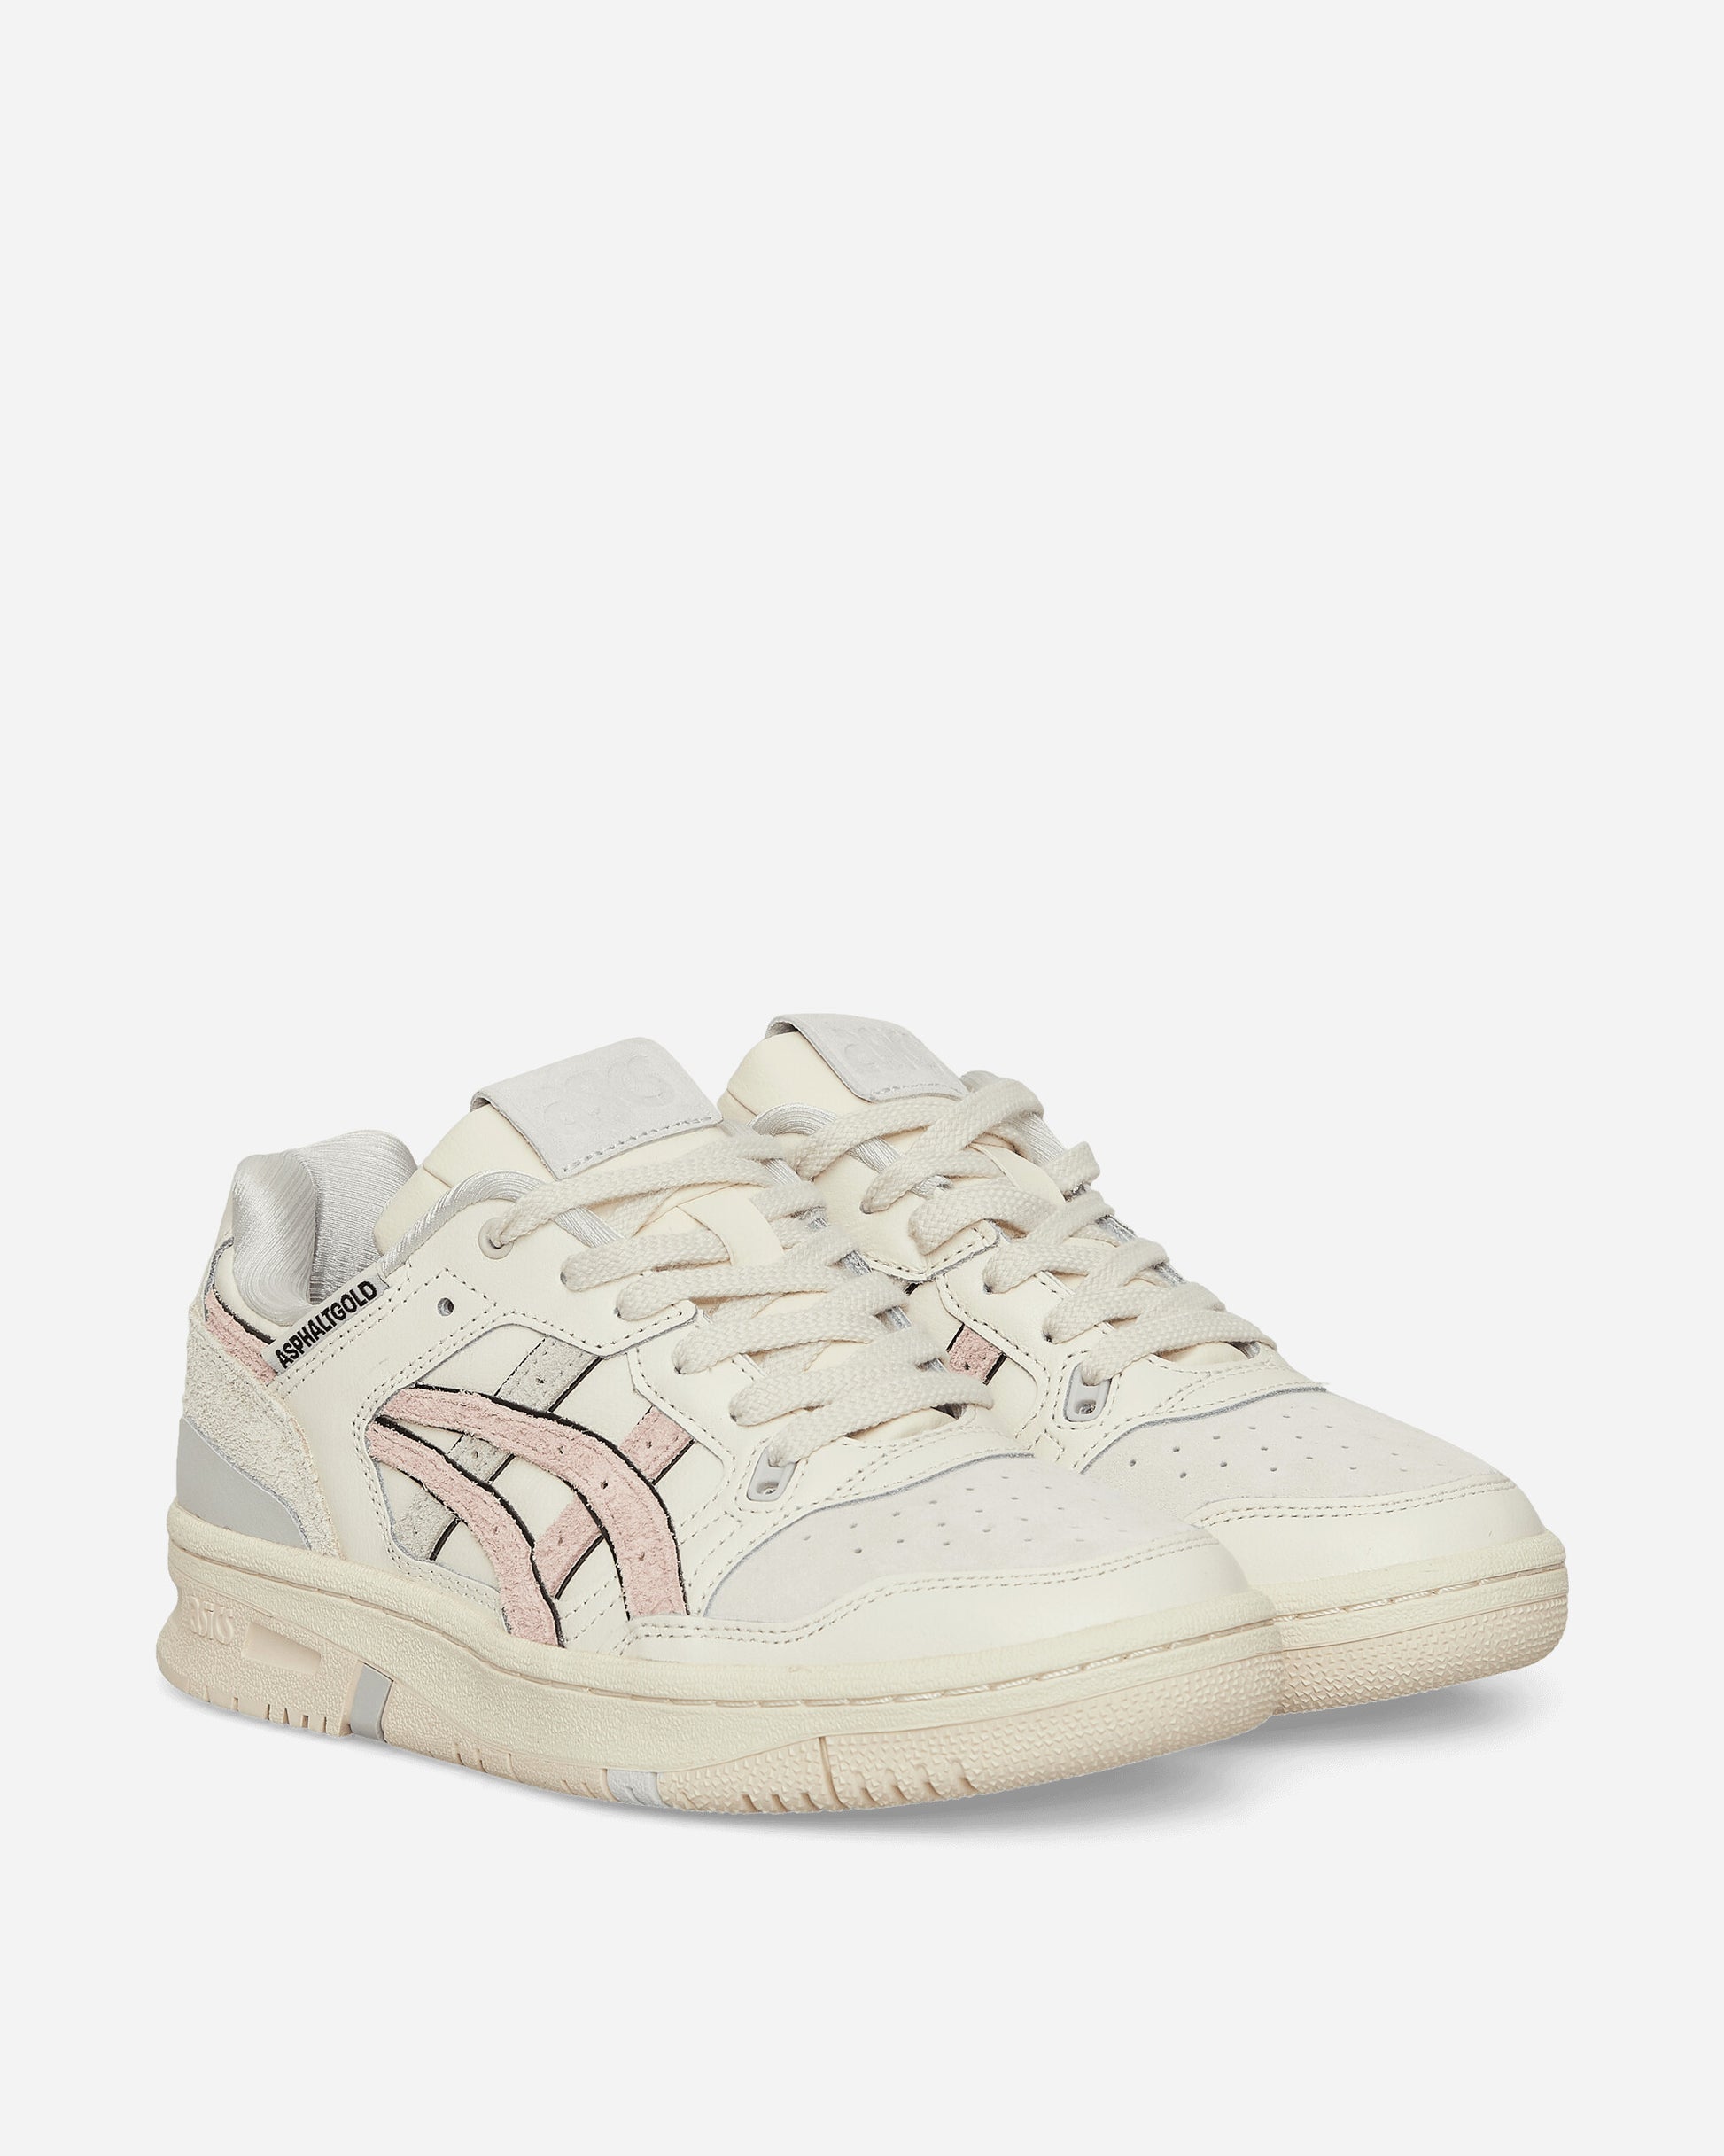 Asics EX89 Cream/Ginger Peach Sneakers Low 1203A326-100